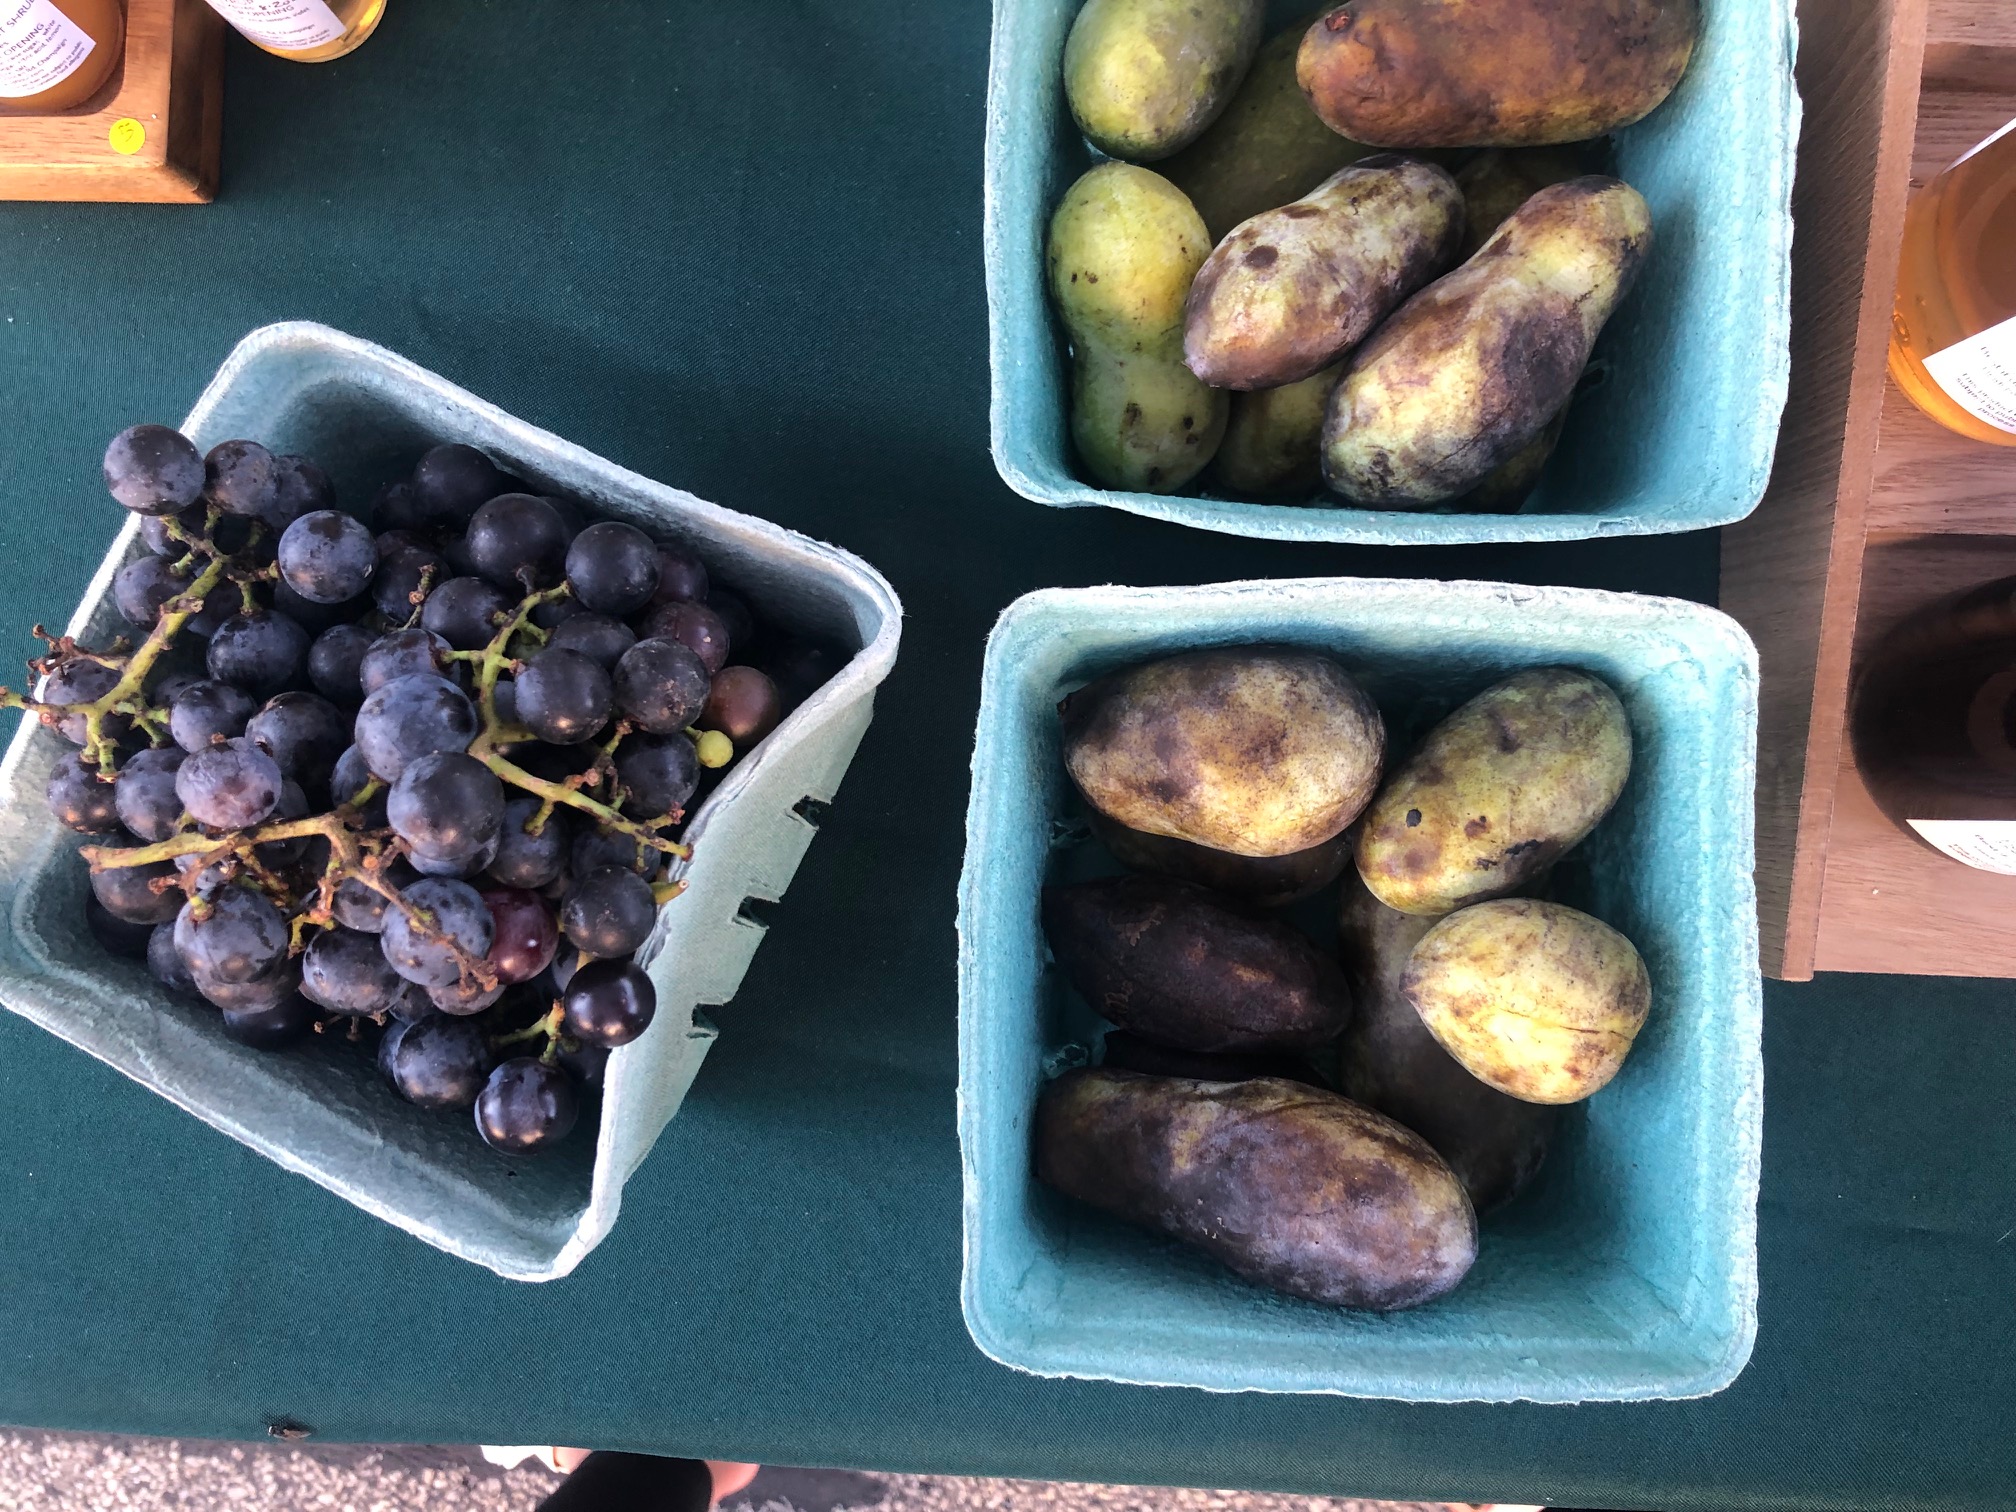 On a black tablecloth, there is a small basket of fruit on the vine and two baskets of paw paws. Photo by Alyssa Buckley.